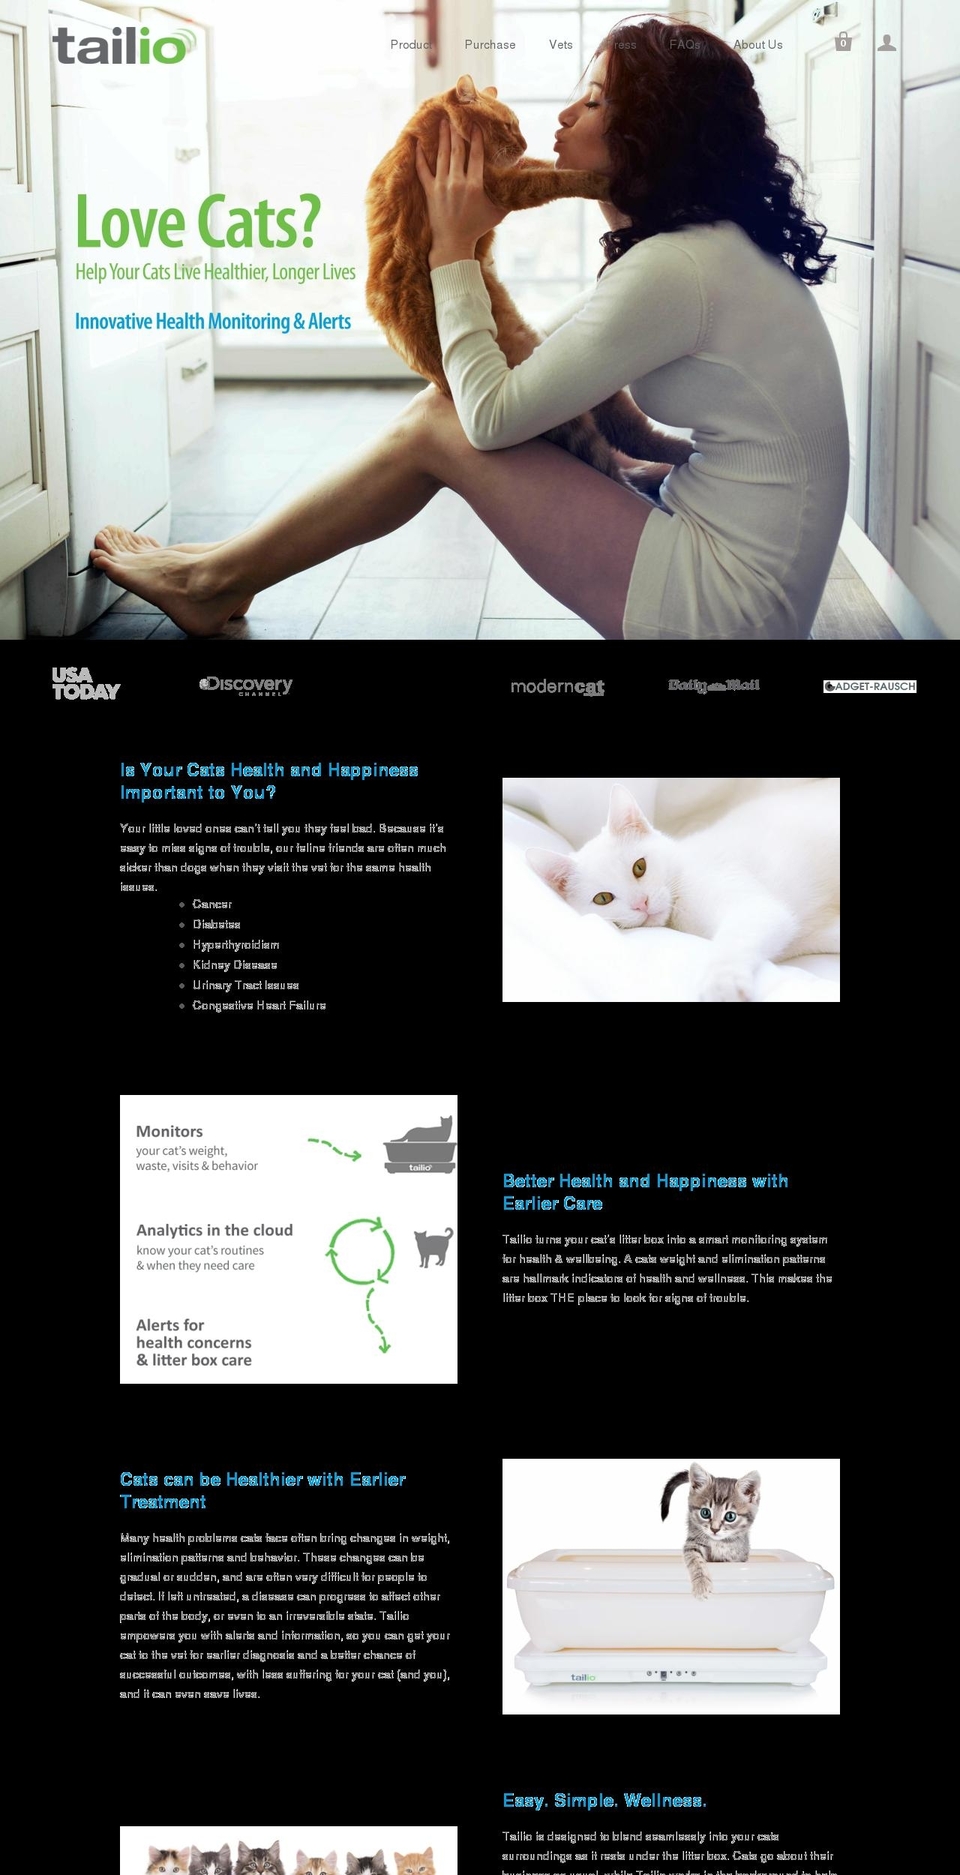 Copy of Copy of Startup before Bold QB 10\/27 Shopify theme site example tailiocat.com